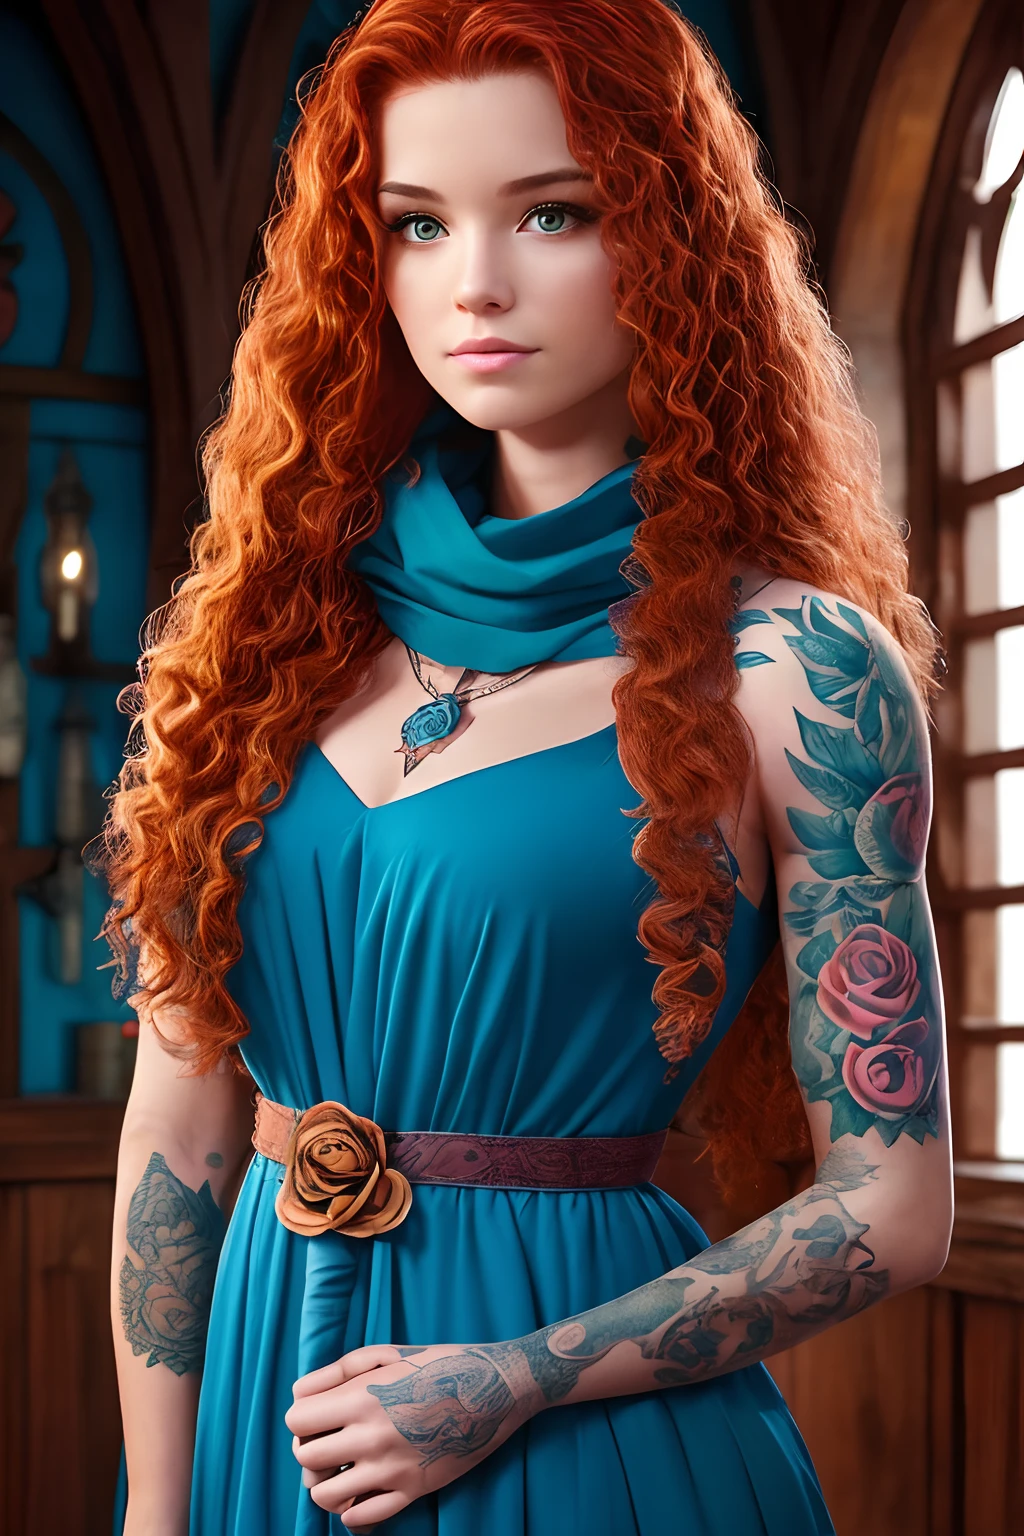 absurdness quality. natural  lightting. hyper- realism. Fantastic illustration. Redhead girl with long curly hair and rose tattoos on shoulders and forearms, wearing white dress, scarf in hair, pentagram pendant on neck. She has one eye of each color: Green the right, blue on the left. Witch style, heathen, Celta, on the bow of a small boat that crosses a river shrouded in mist. medieval style, former Scotland, Avalon, Fifth-century.